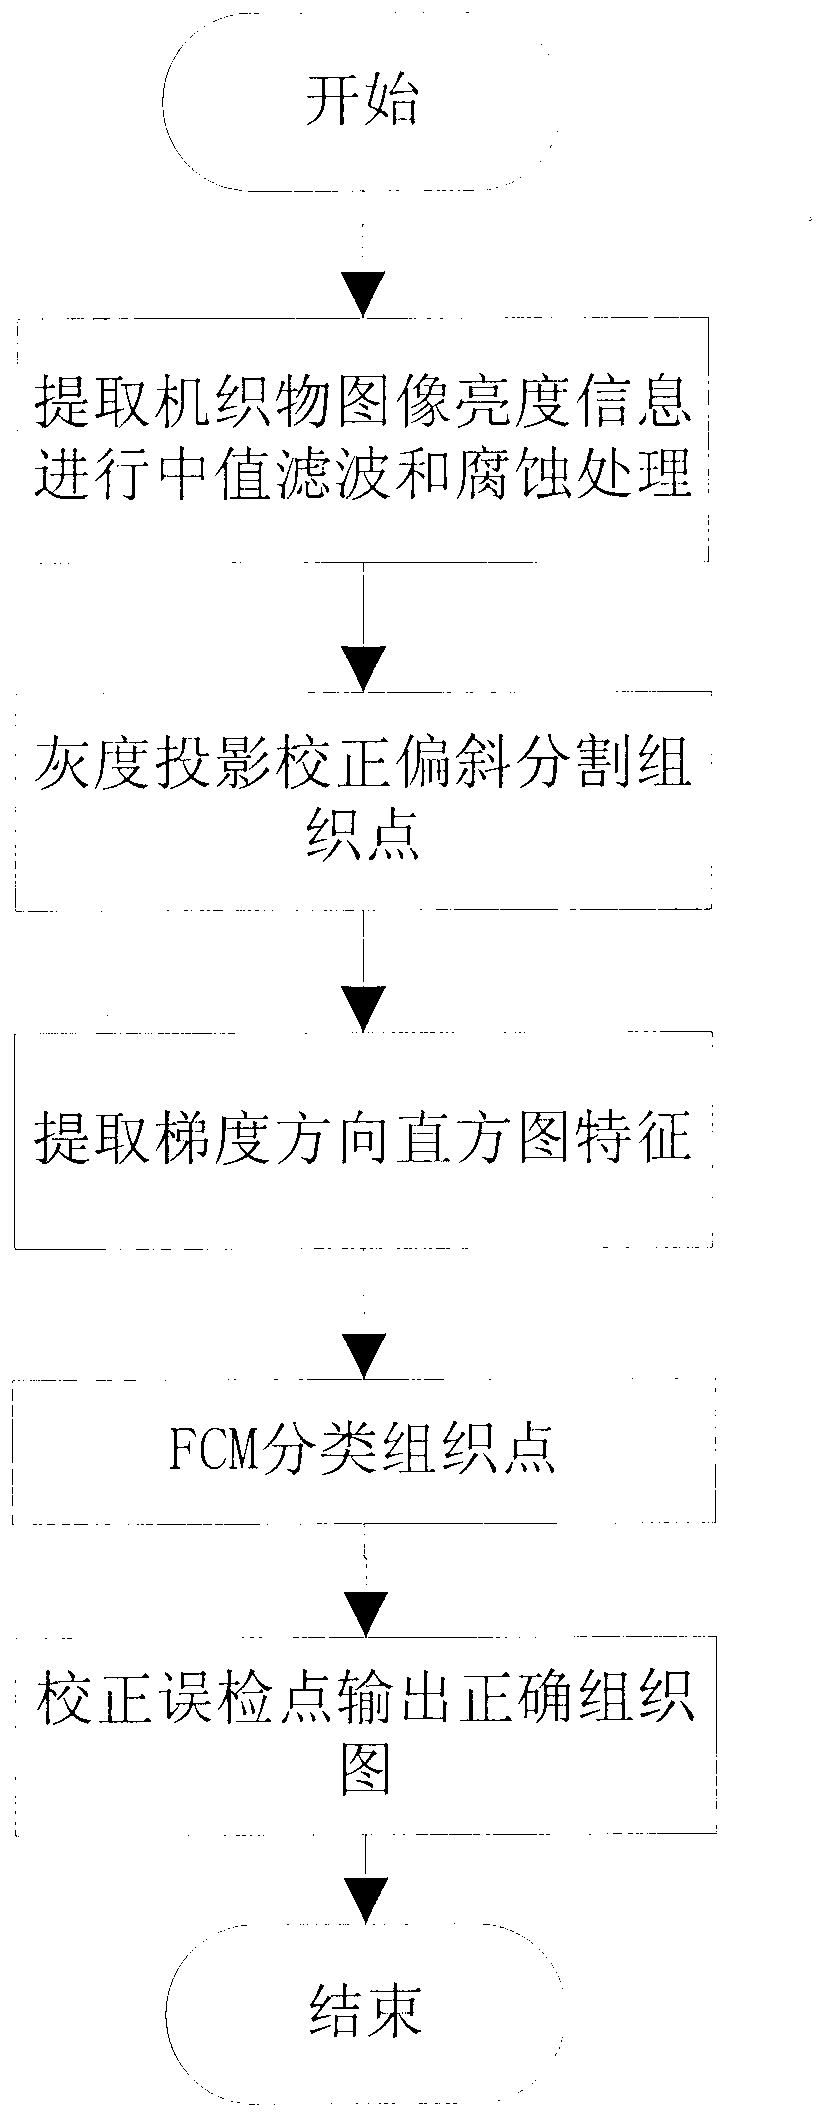 Recognition method for woven fabric structure